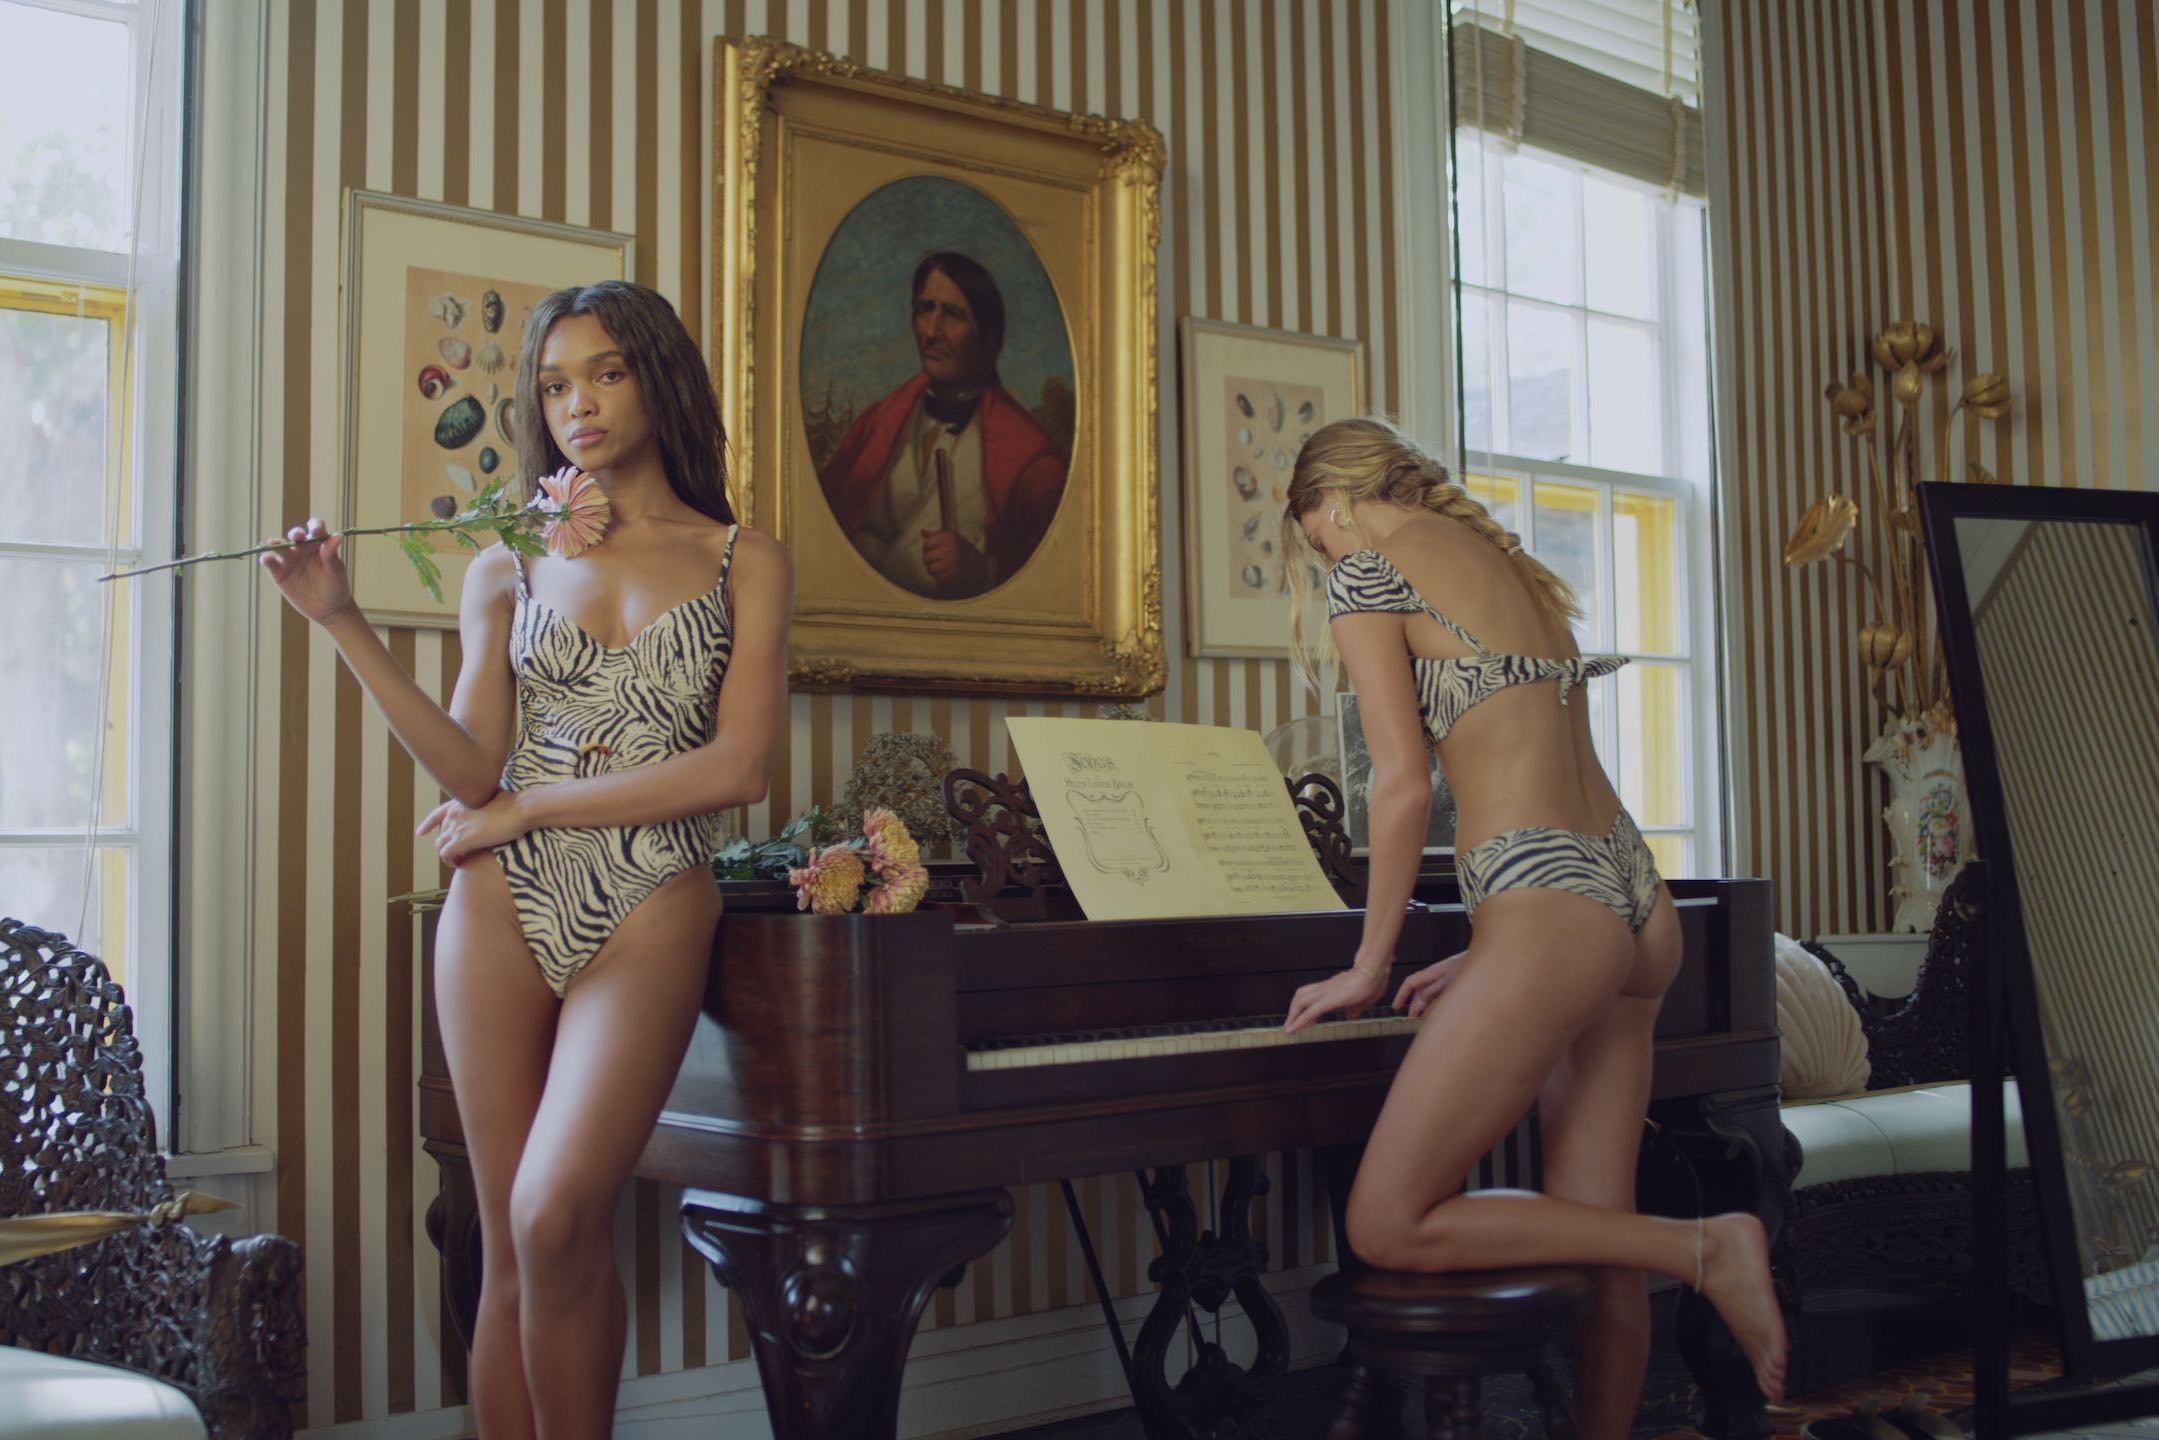 Production Resources Location with two women wearing black and white patterned swimsuits with one leaning against the piano holsing a flower and the other playing the piano